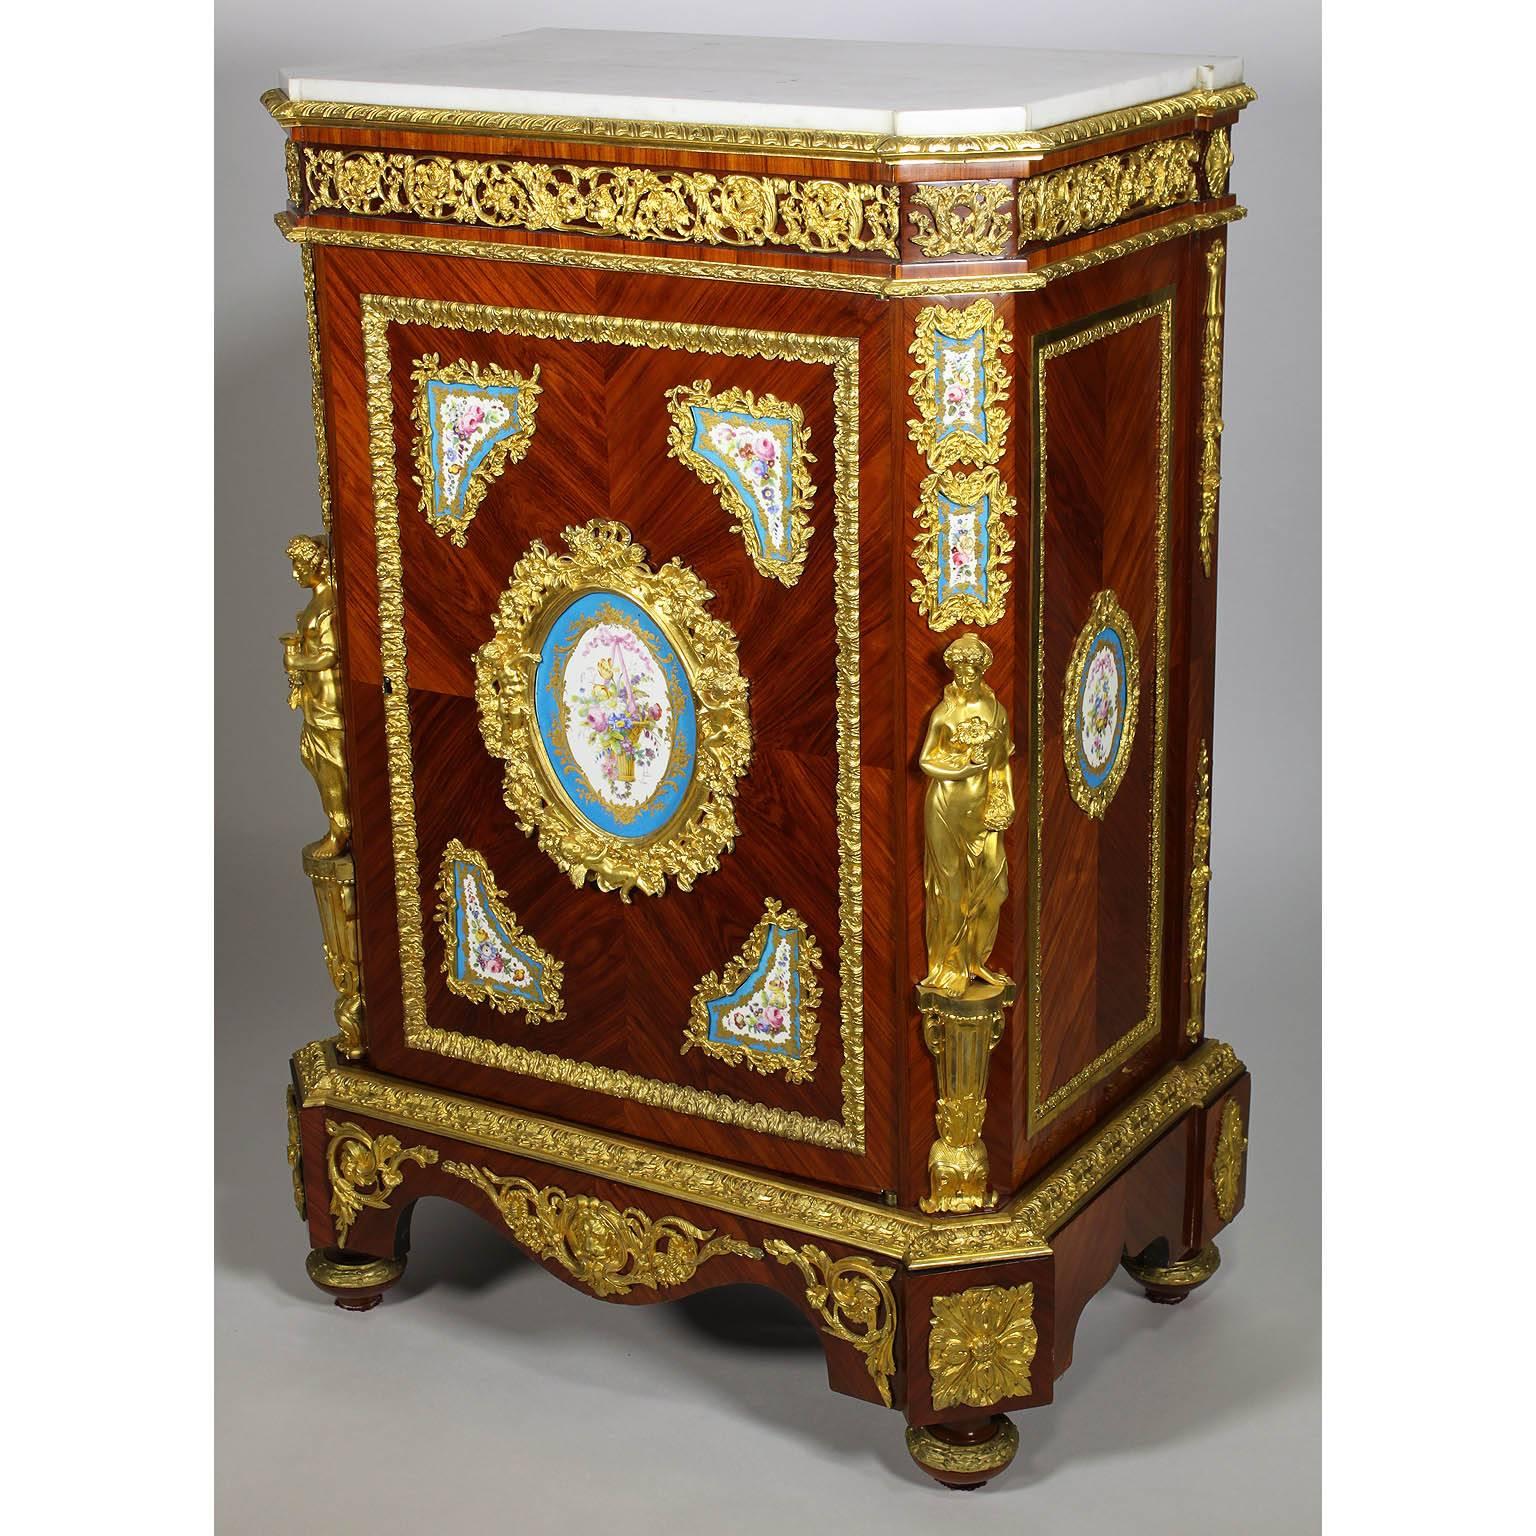 A very fine pair of French Napoleon III figural ormolu and porcelain (probably Sevres) mounted tulipwood Meuble A Hauteur D'Appui. The rectangular shaped body fitted with a white marble top on canted corners. The reticulated frieze of scrolling